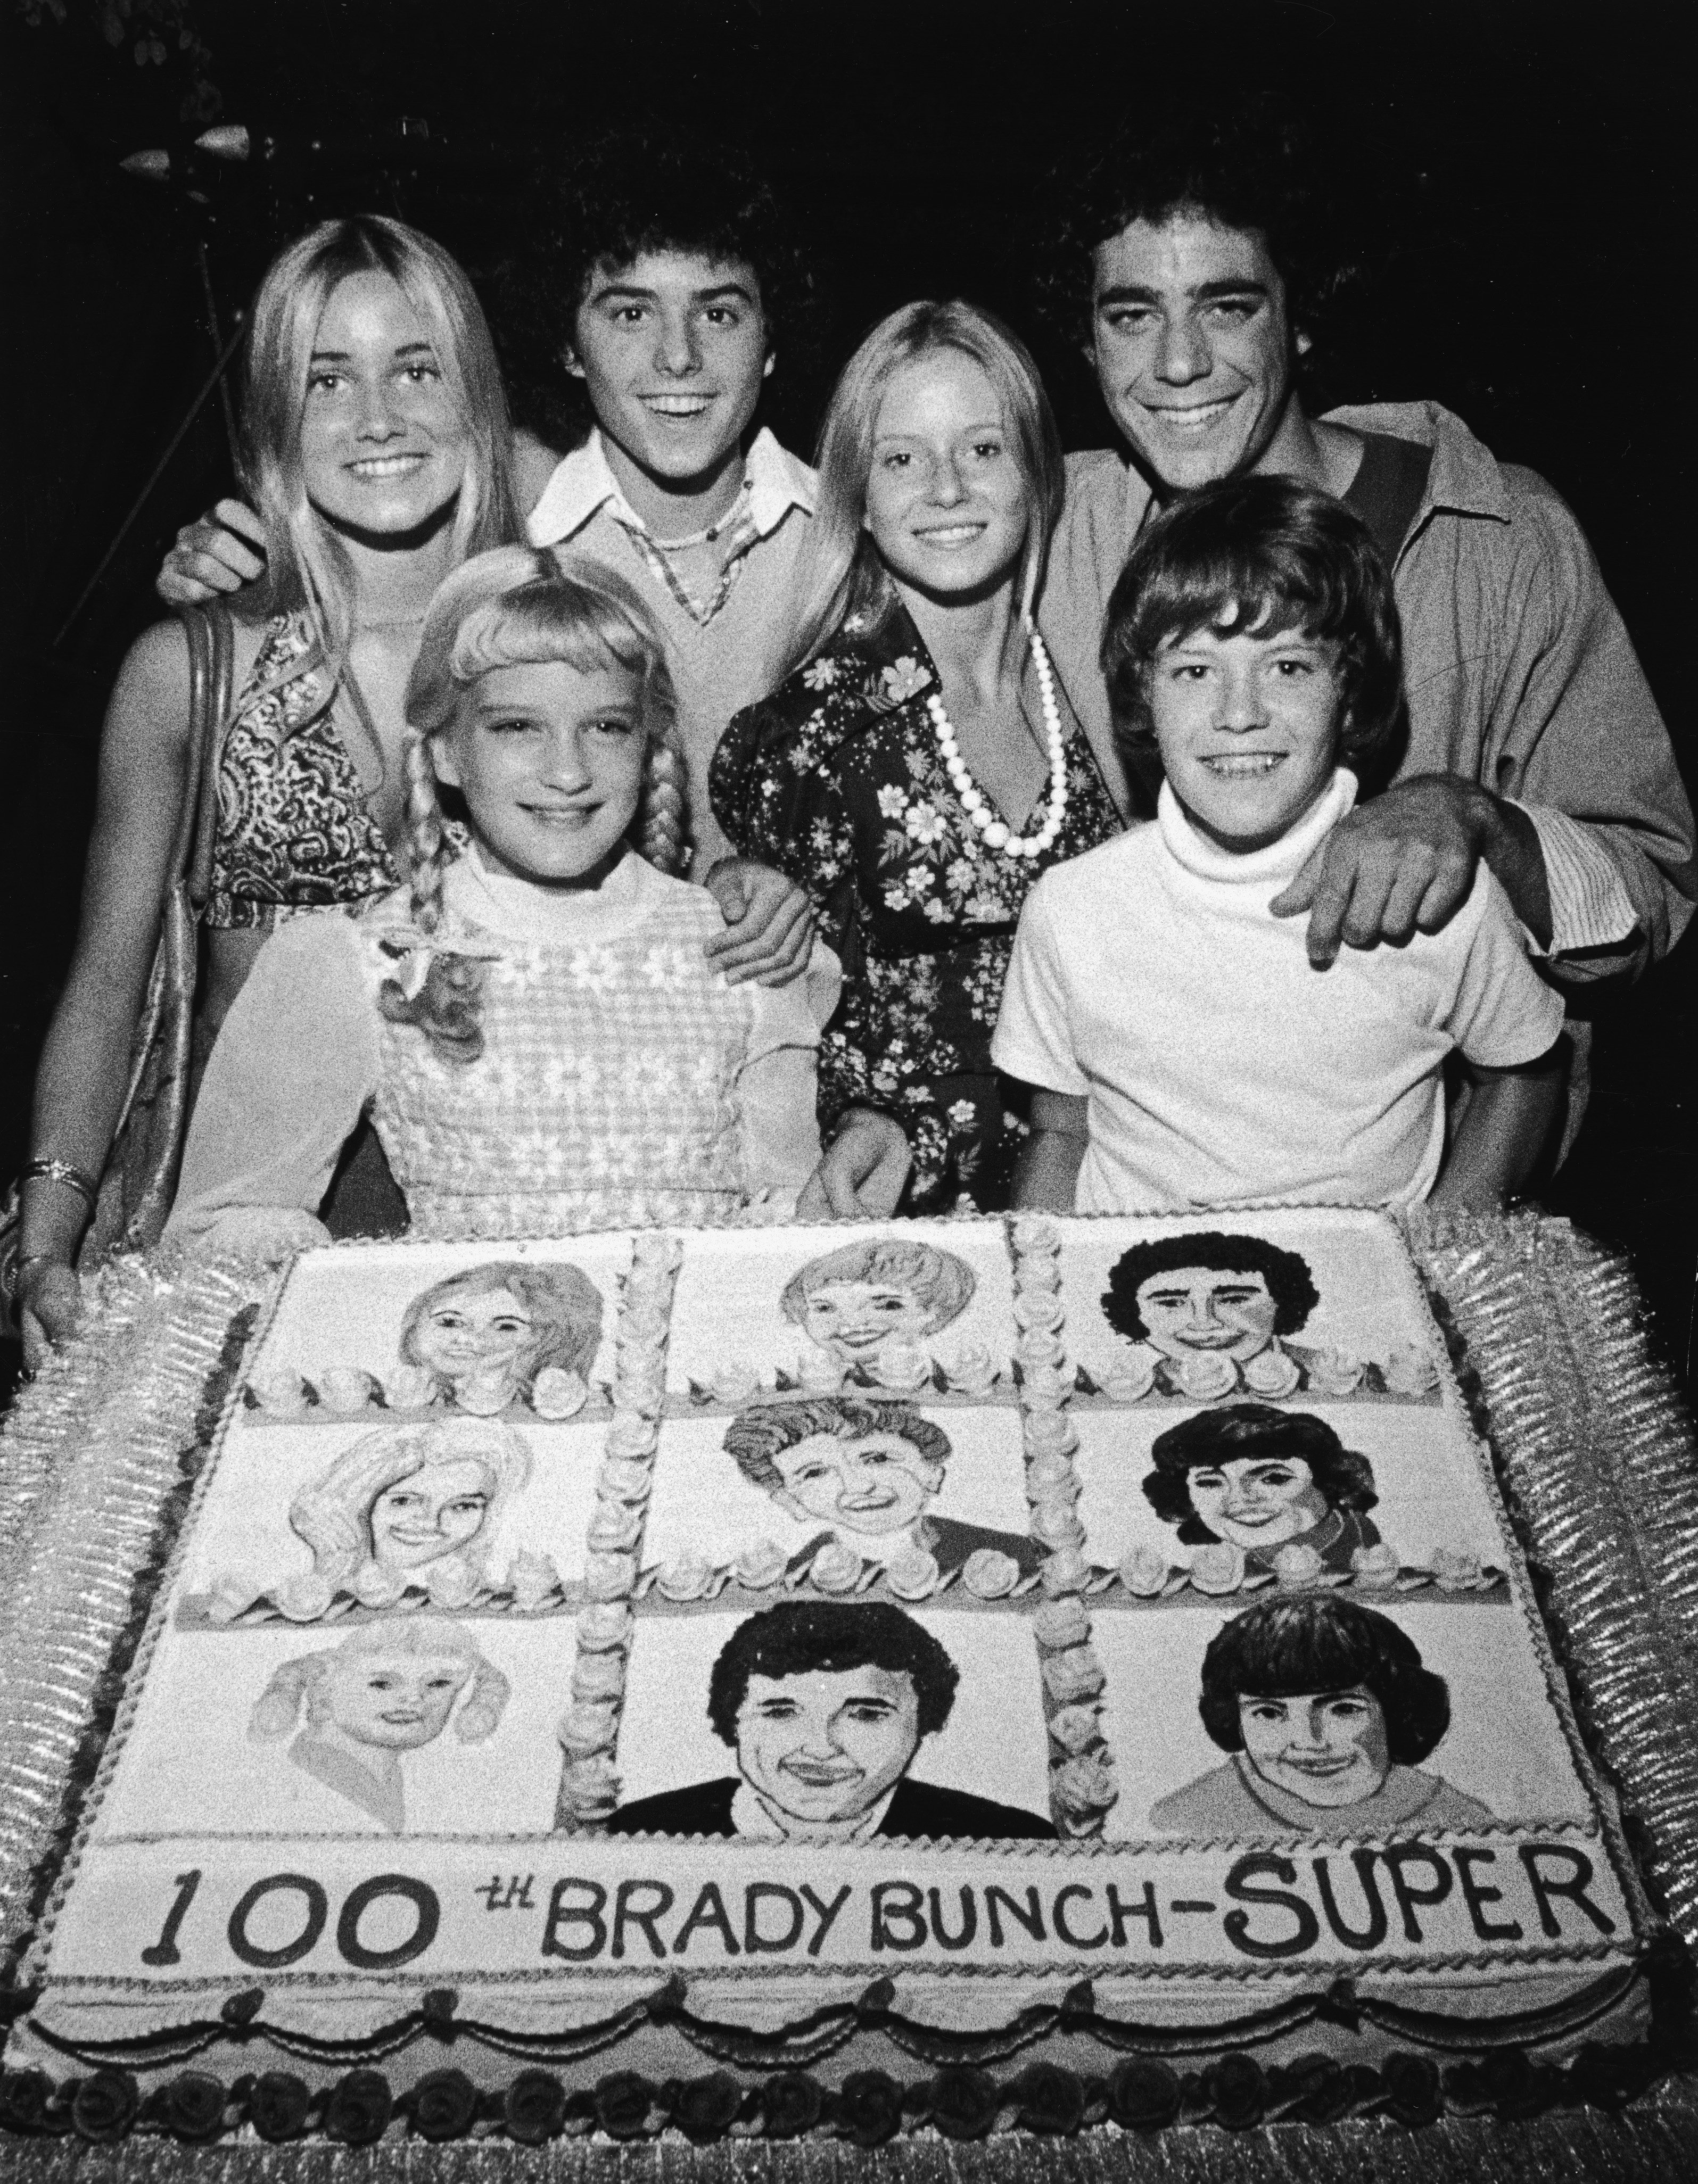 Maureen McCormick, Susan Olsen, Christopher Knight, Eve Plumb, Barry Williams, and Mike Lookinland from "The Brady Bunch" circa 1973. | Source: Getty Images.